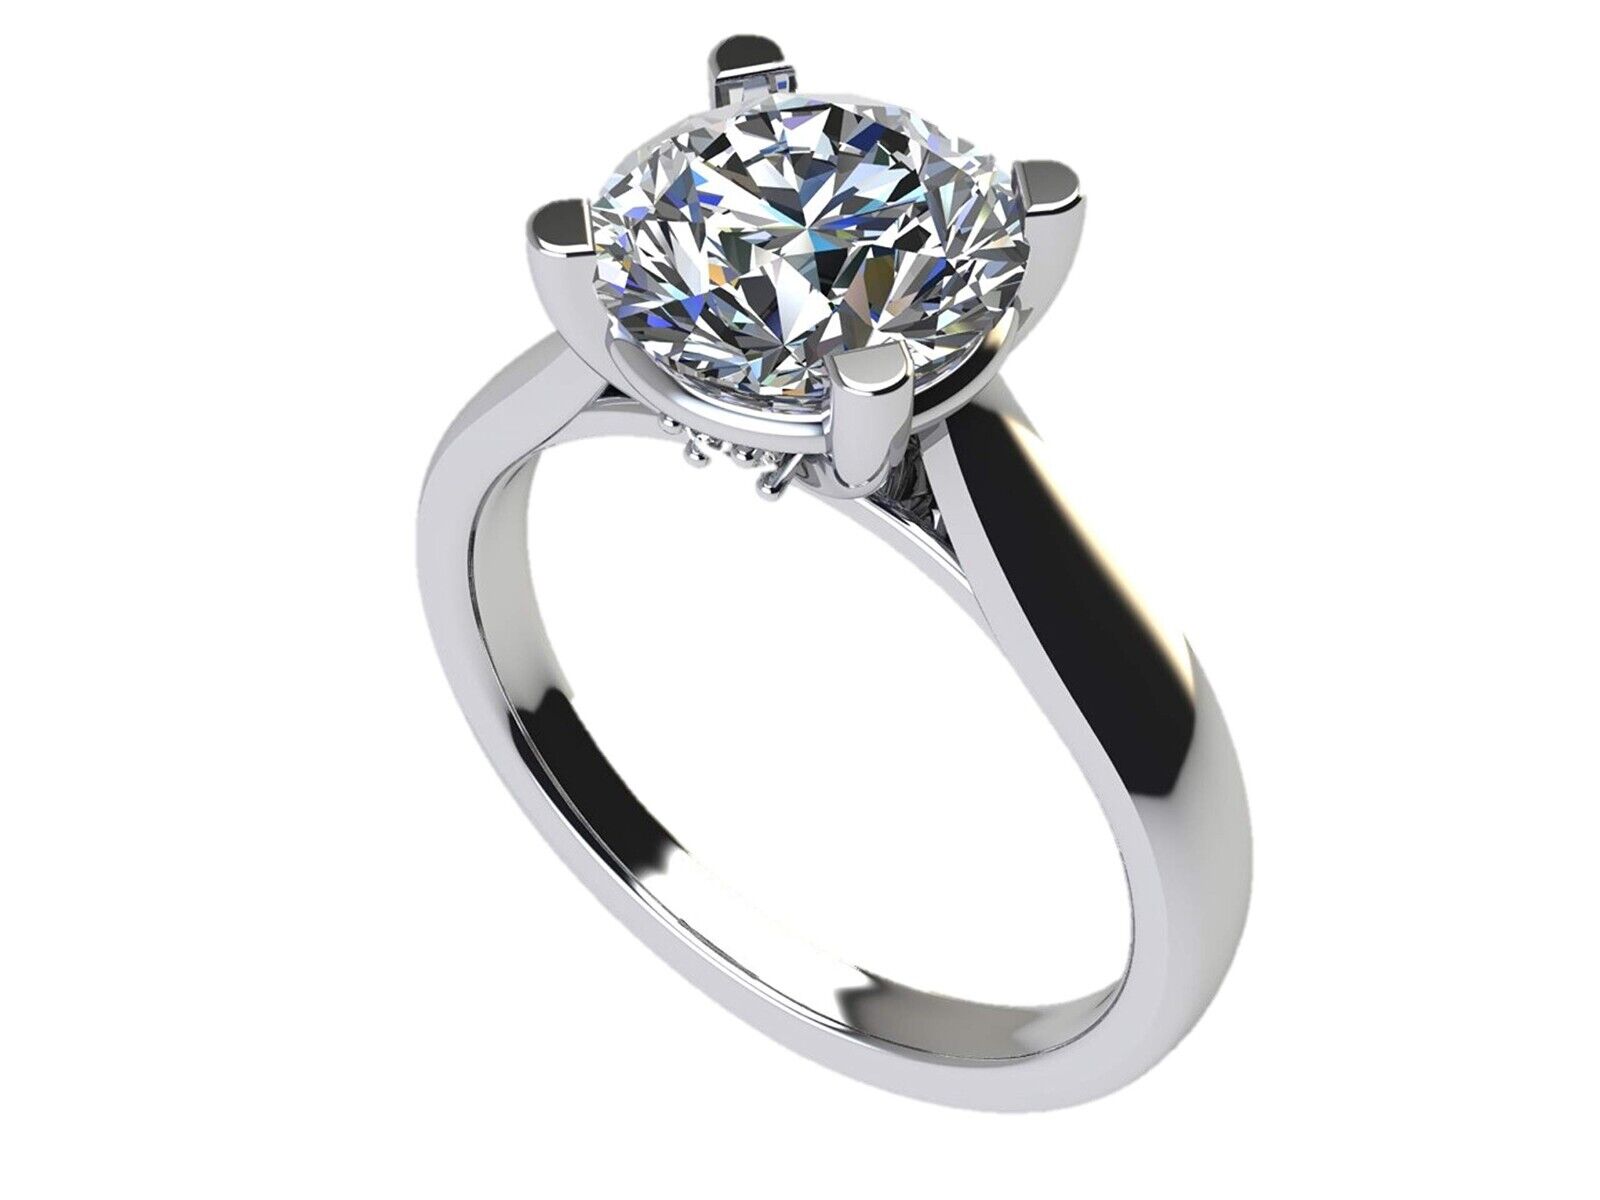  "Eternal Elegance: NANA Silver 6.5mm Round Cut Zirconia Solitaire Engagement Ring - Platinum Plated (Size 4)"